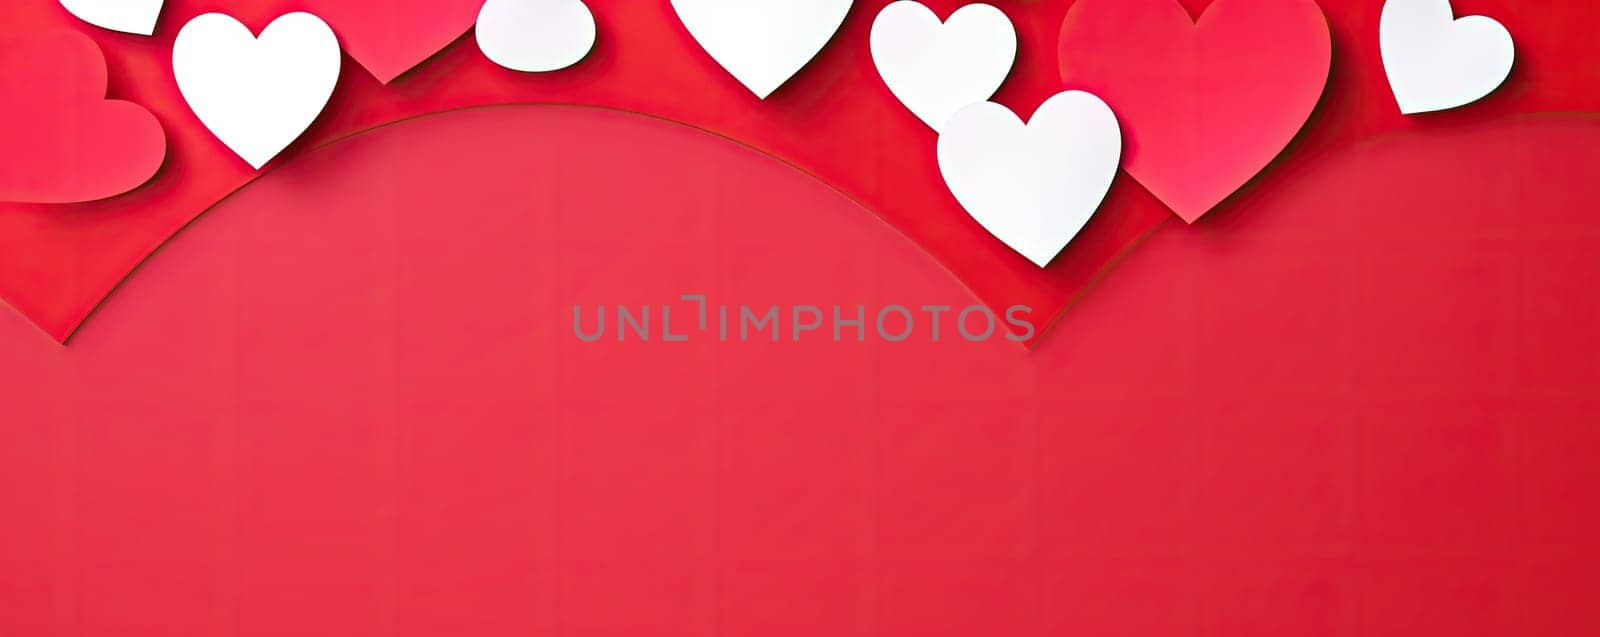 Red and white hearts on a red background for Valentine's Day